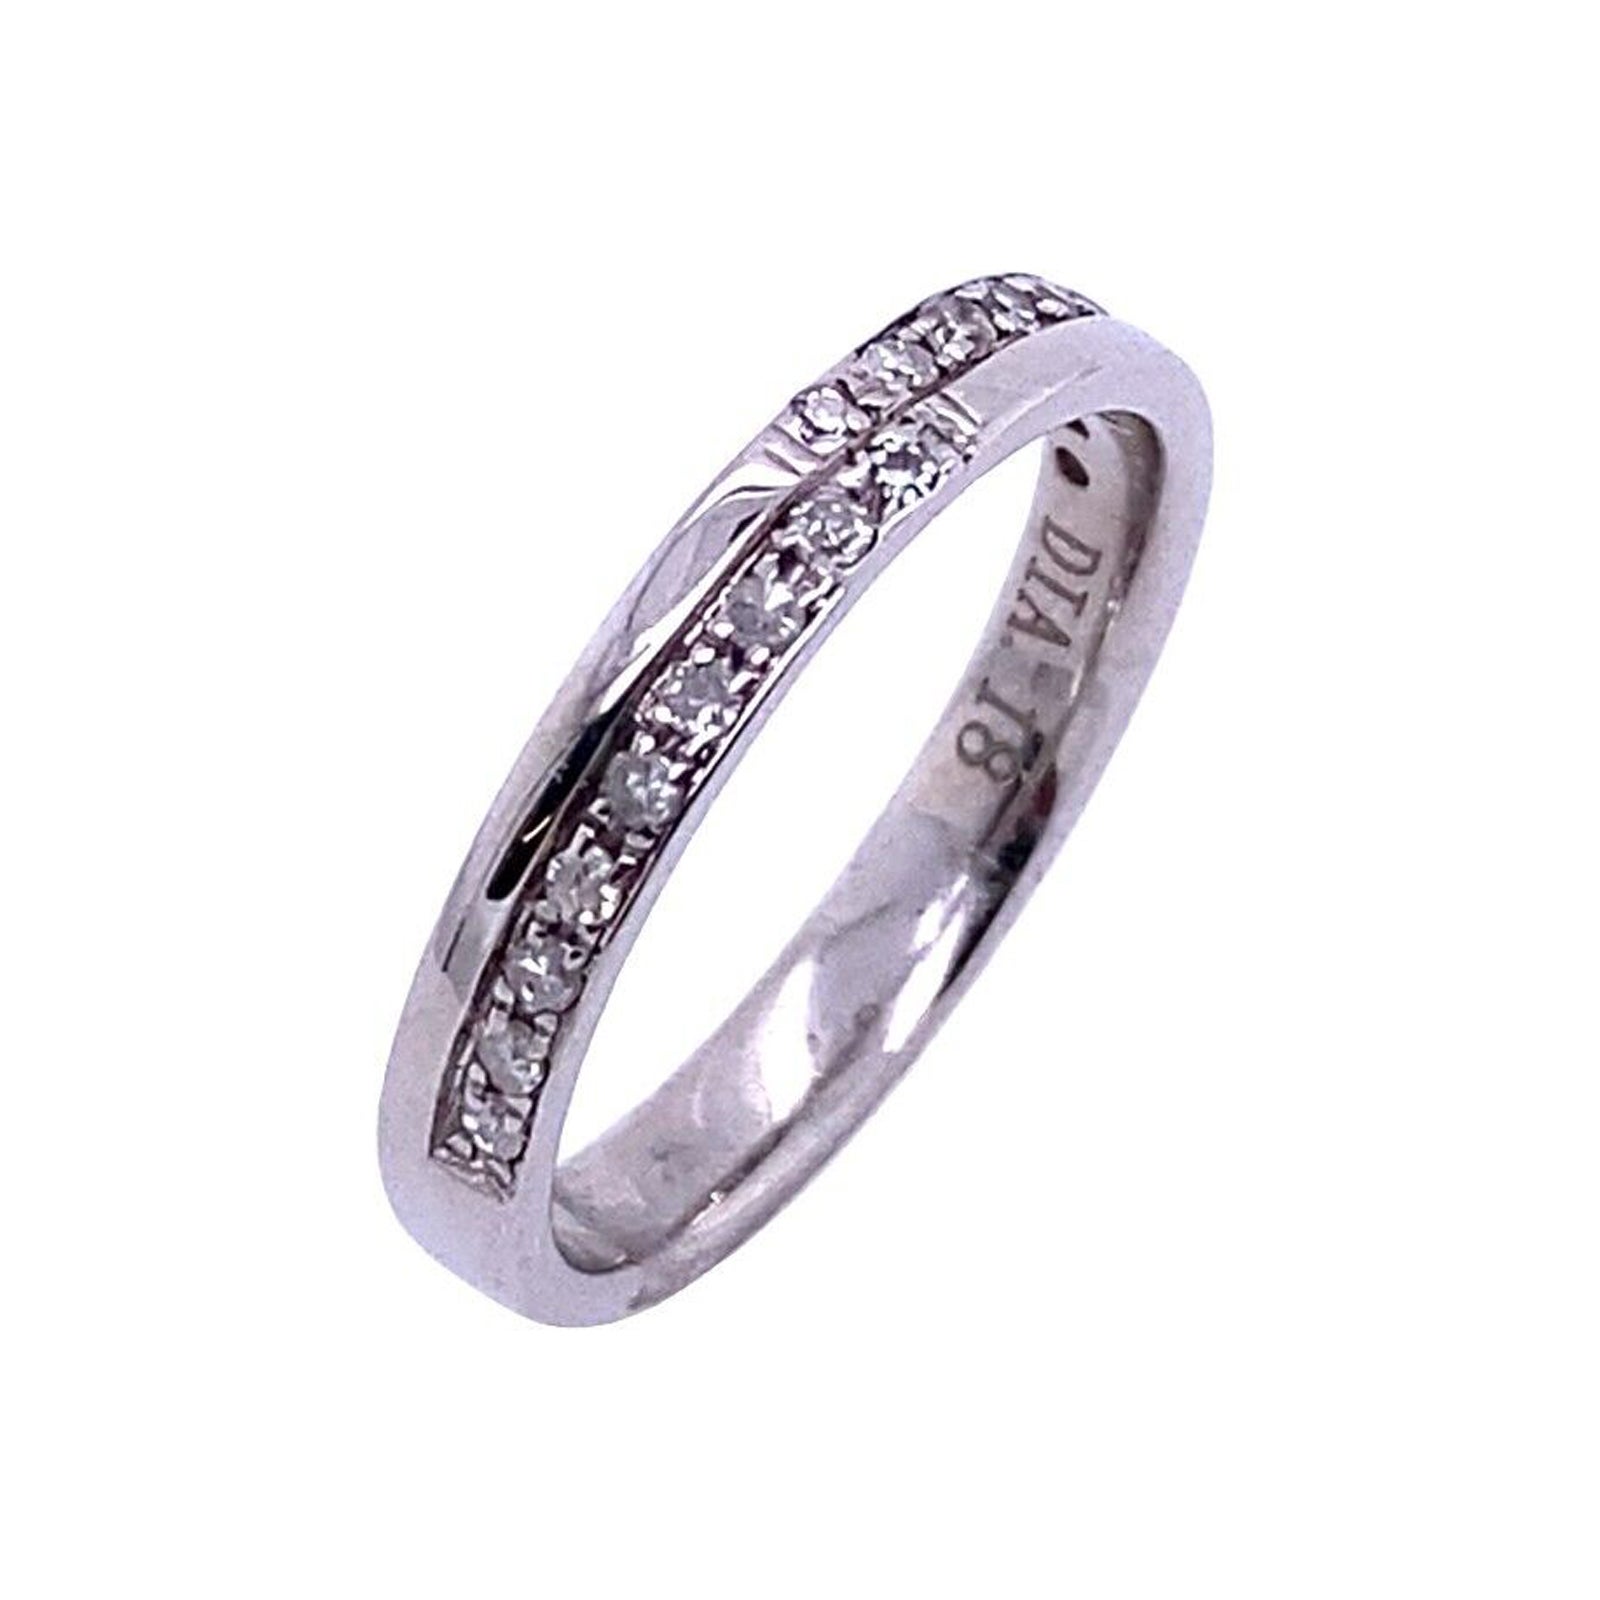 0.18ct of RBC Diamond Set Wedding Band in 18ct White Gold For Sale